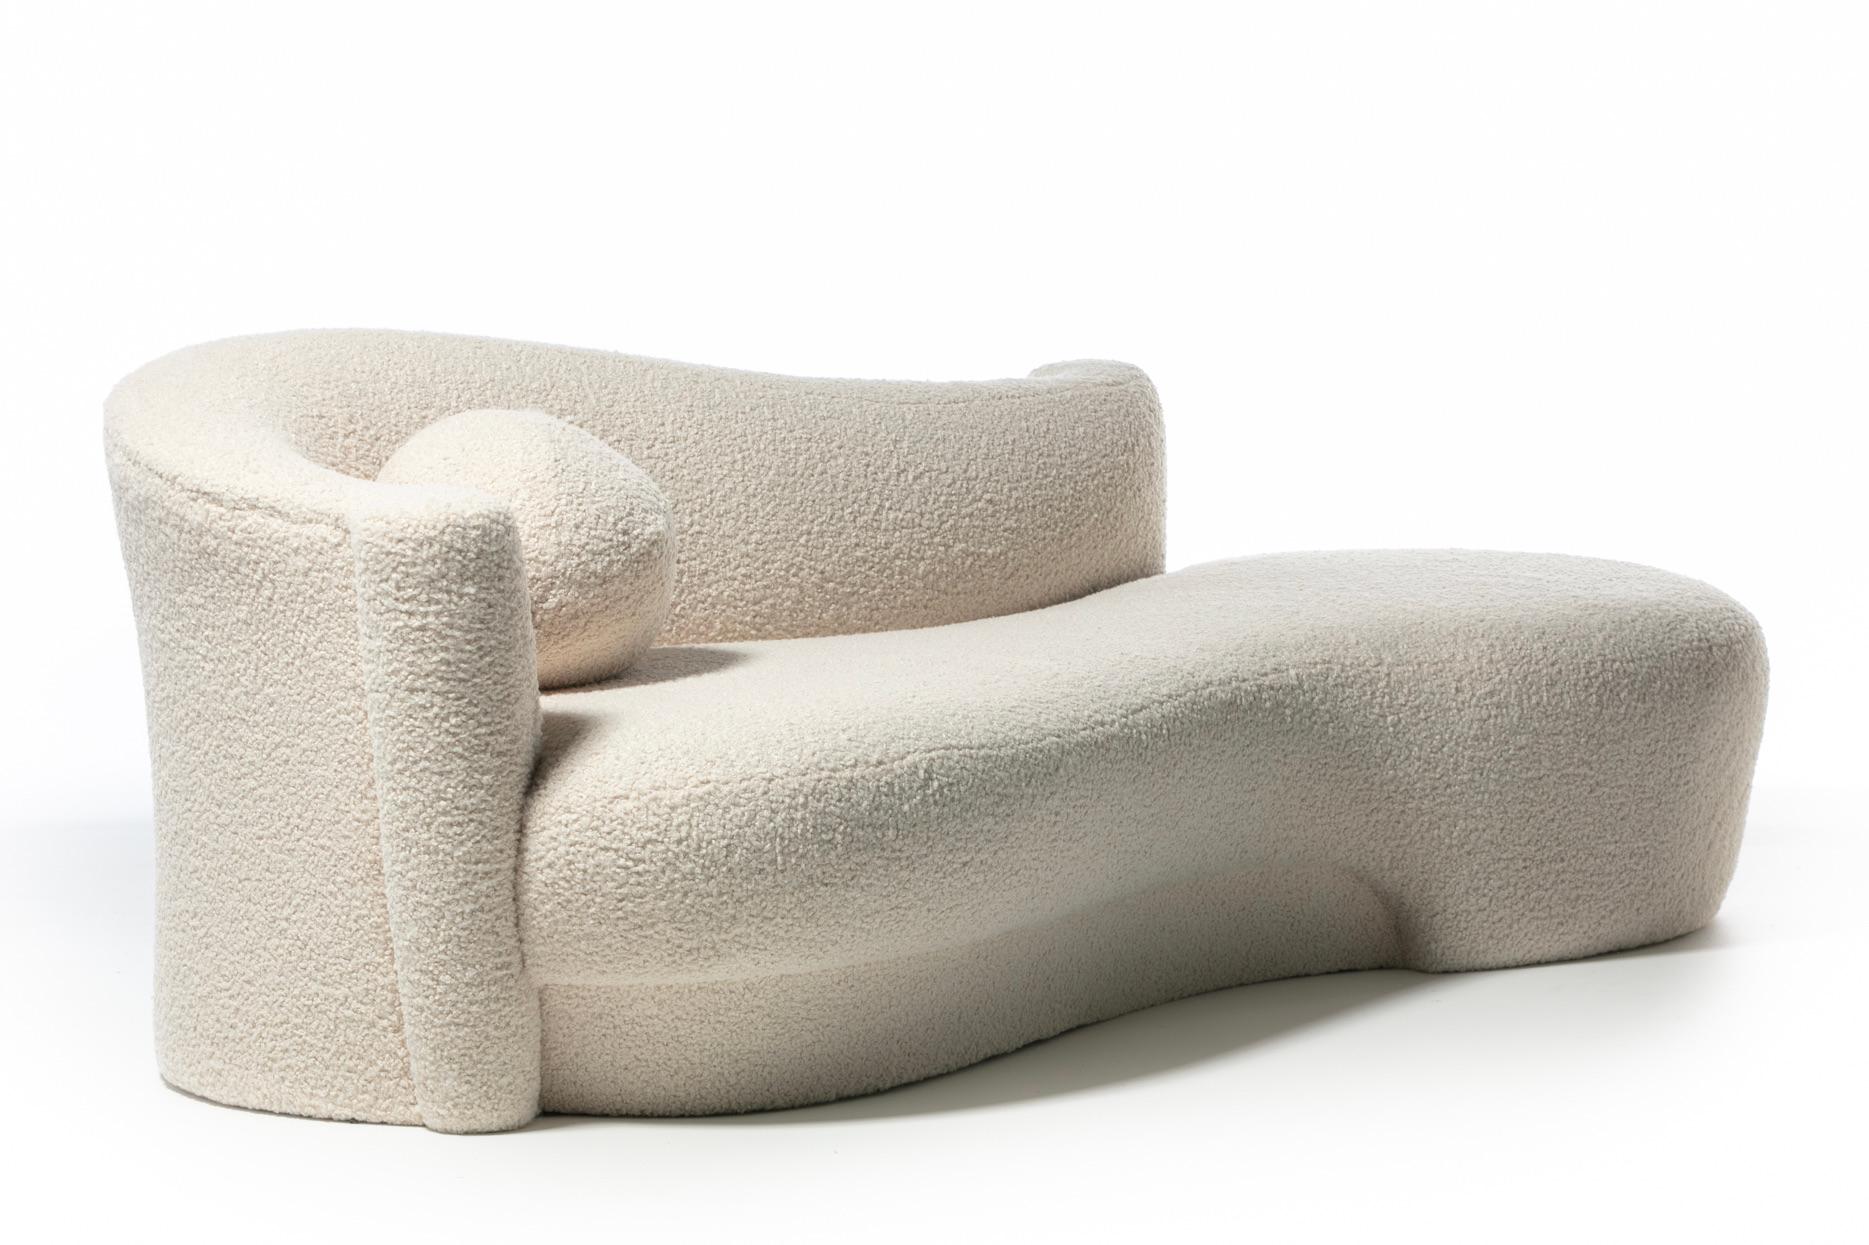 Post-Modern Weiman Sofa / Large Chaise in Supple Lux Ivory Bouclé, c. 1990